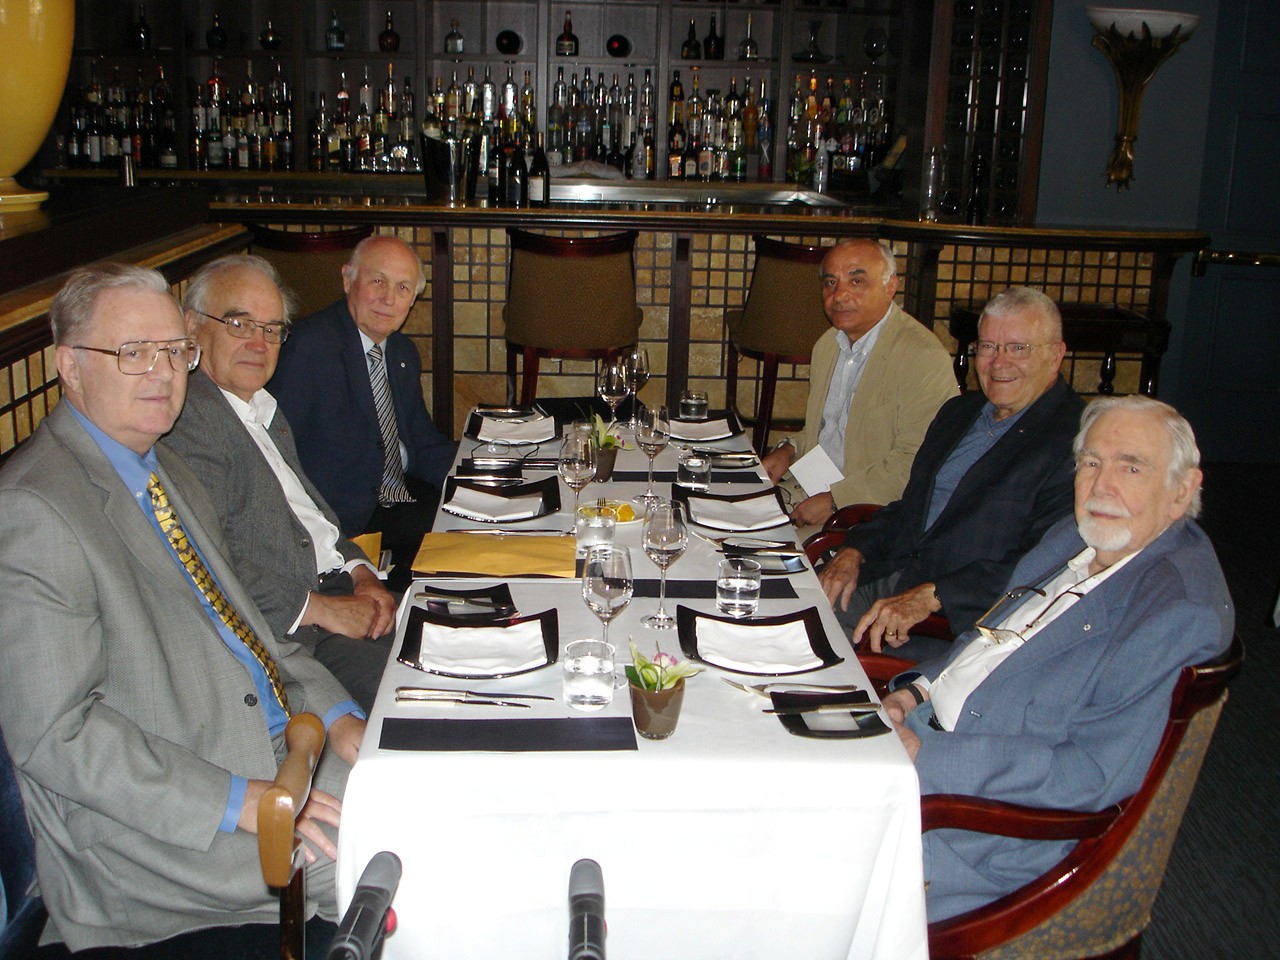 Five UTIAS Professors and astronaut Fred Haise at the dinner table